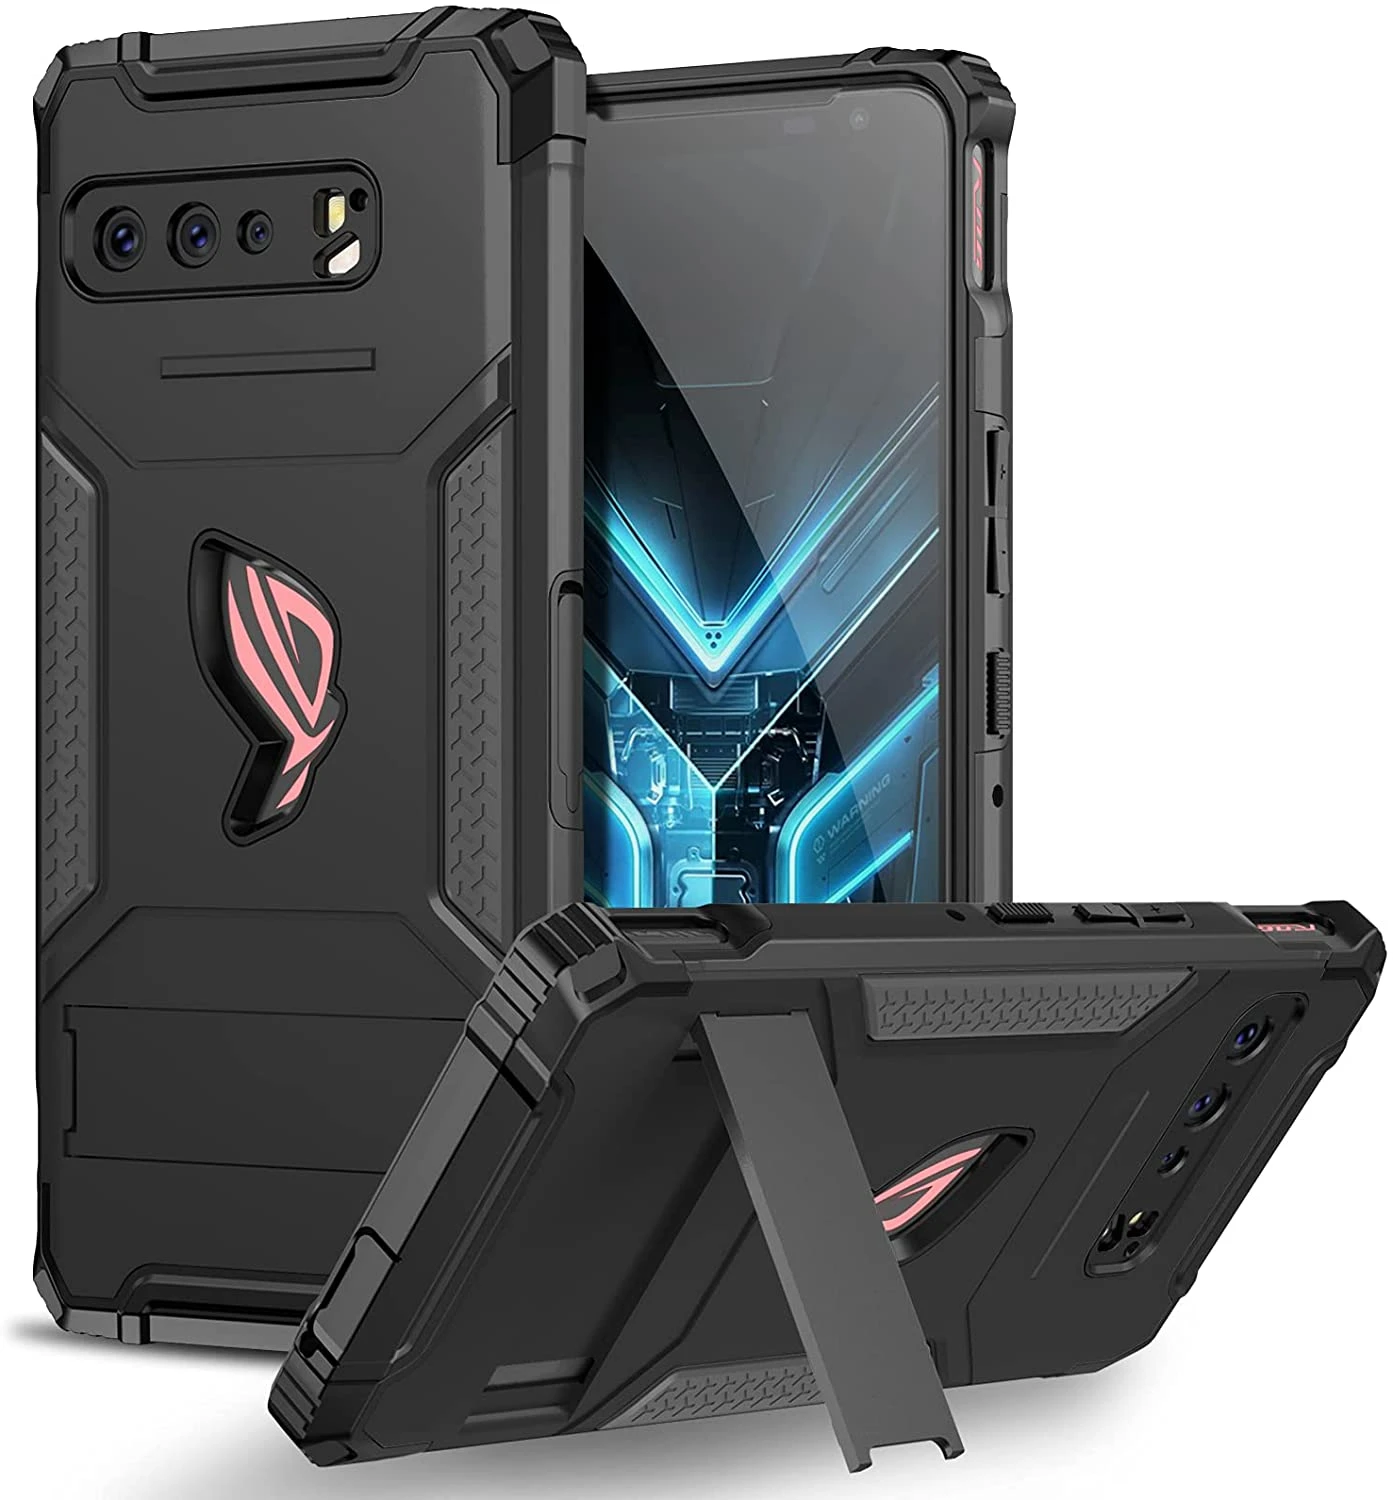 ZSHOW Armor Case for ASUS ROG Phone 2 Case Air Trigger Compatible with Kickstand and Dust Plug Test Grade Drop Protection